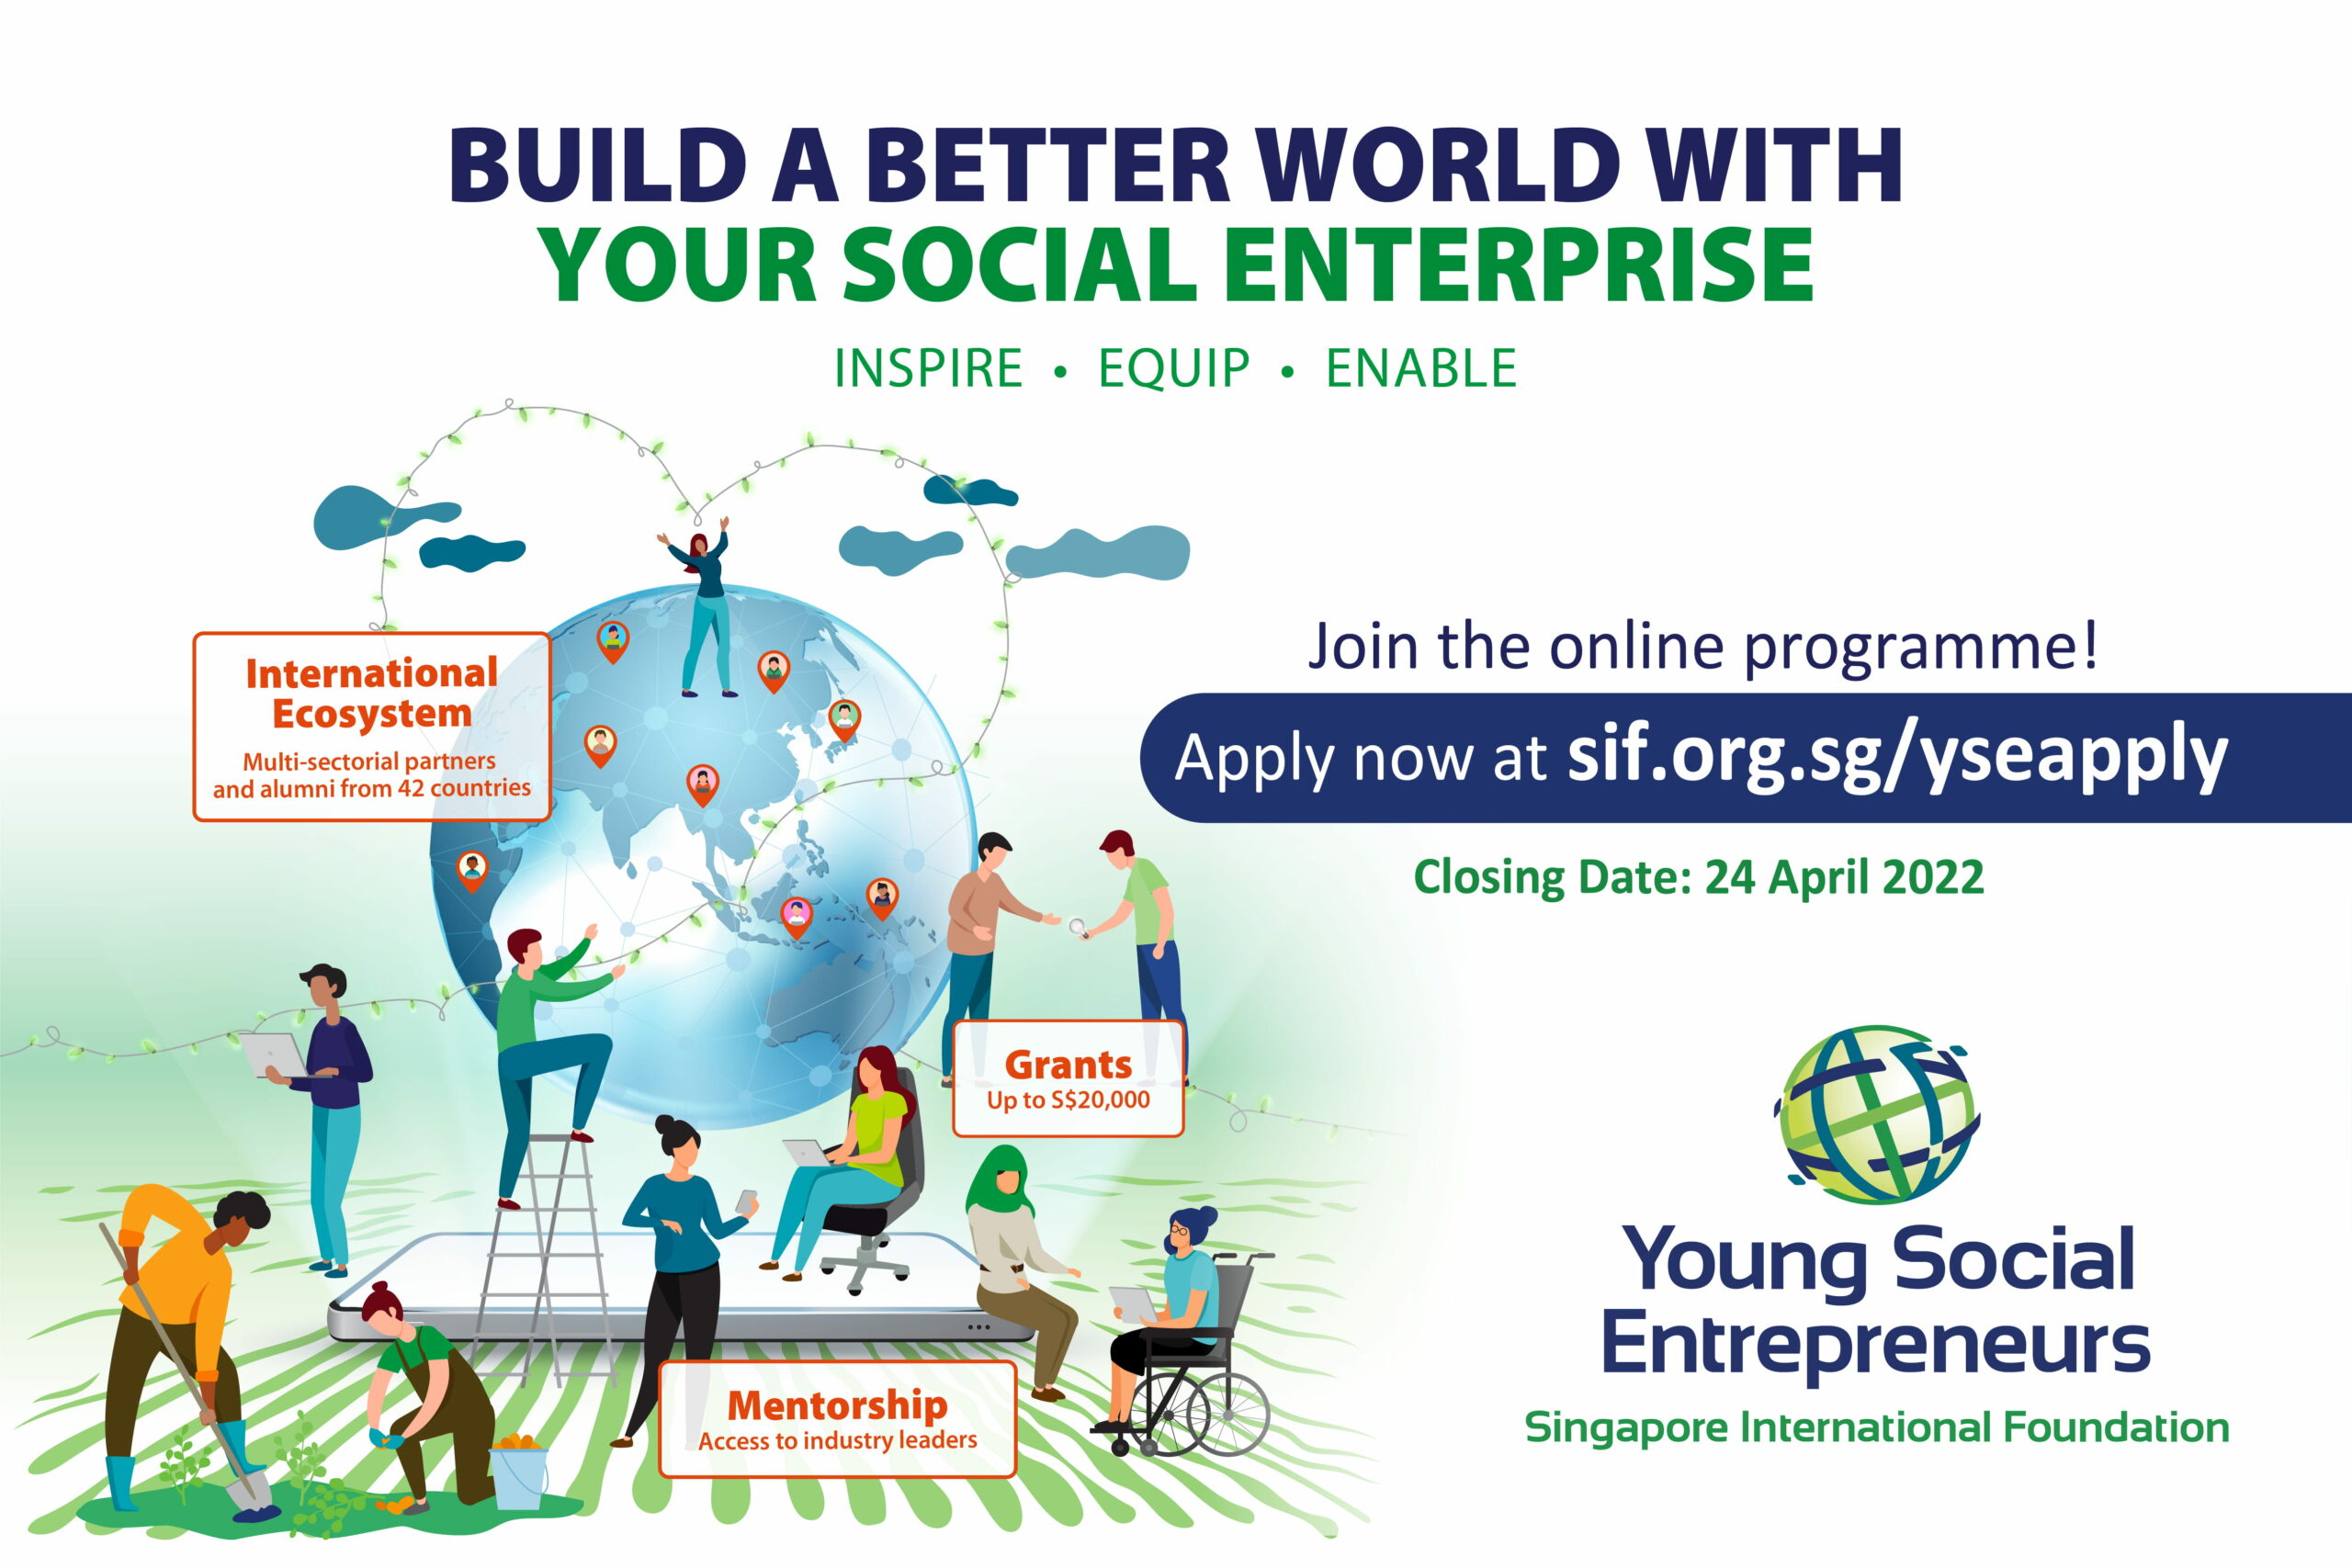 Singapore International Foundation’s Young Social Entrepreneurs Global Programme 2022 (Up to S$20,000 grant)